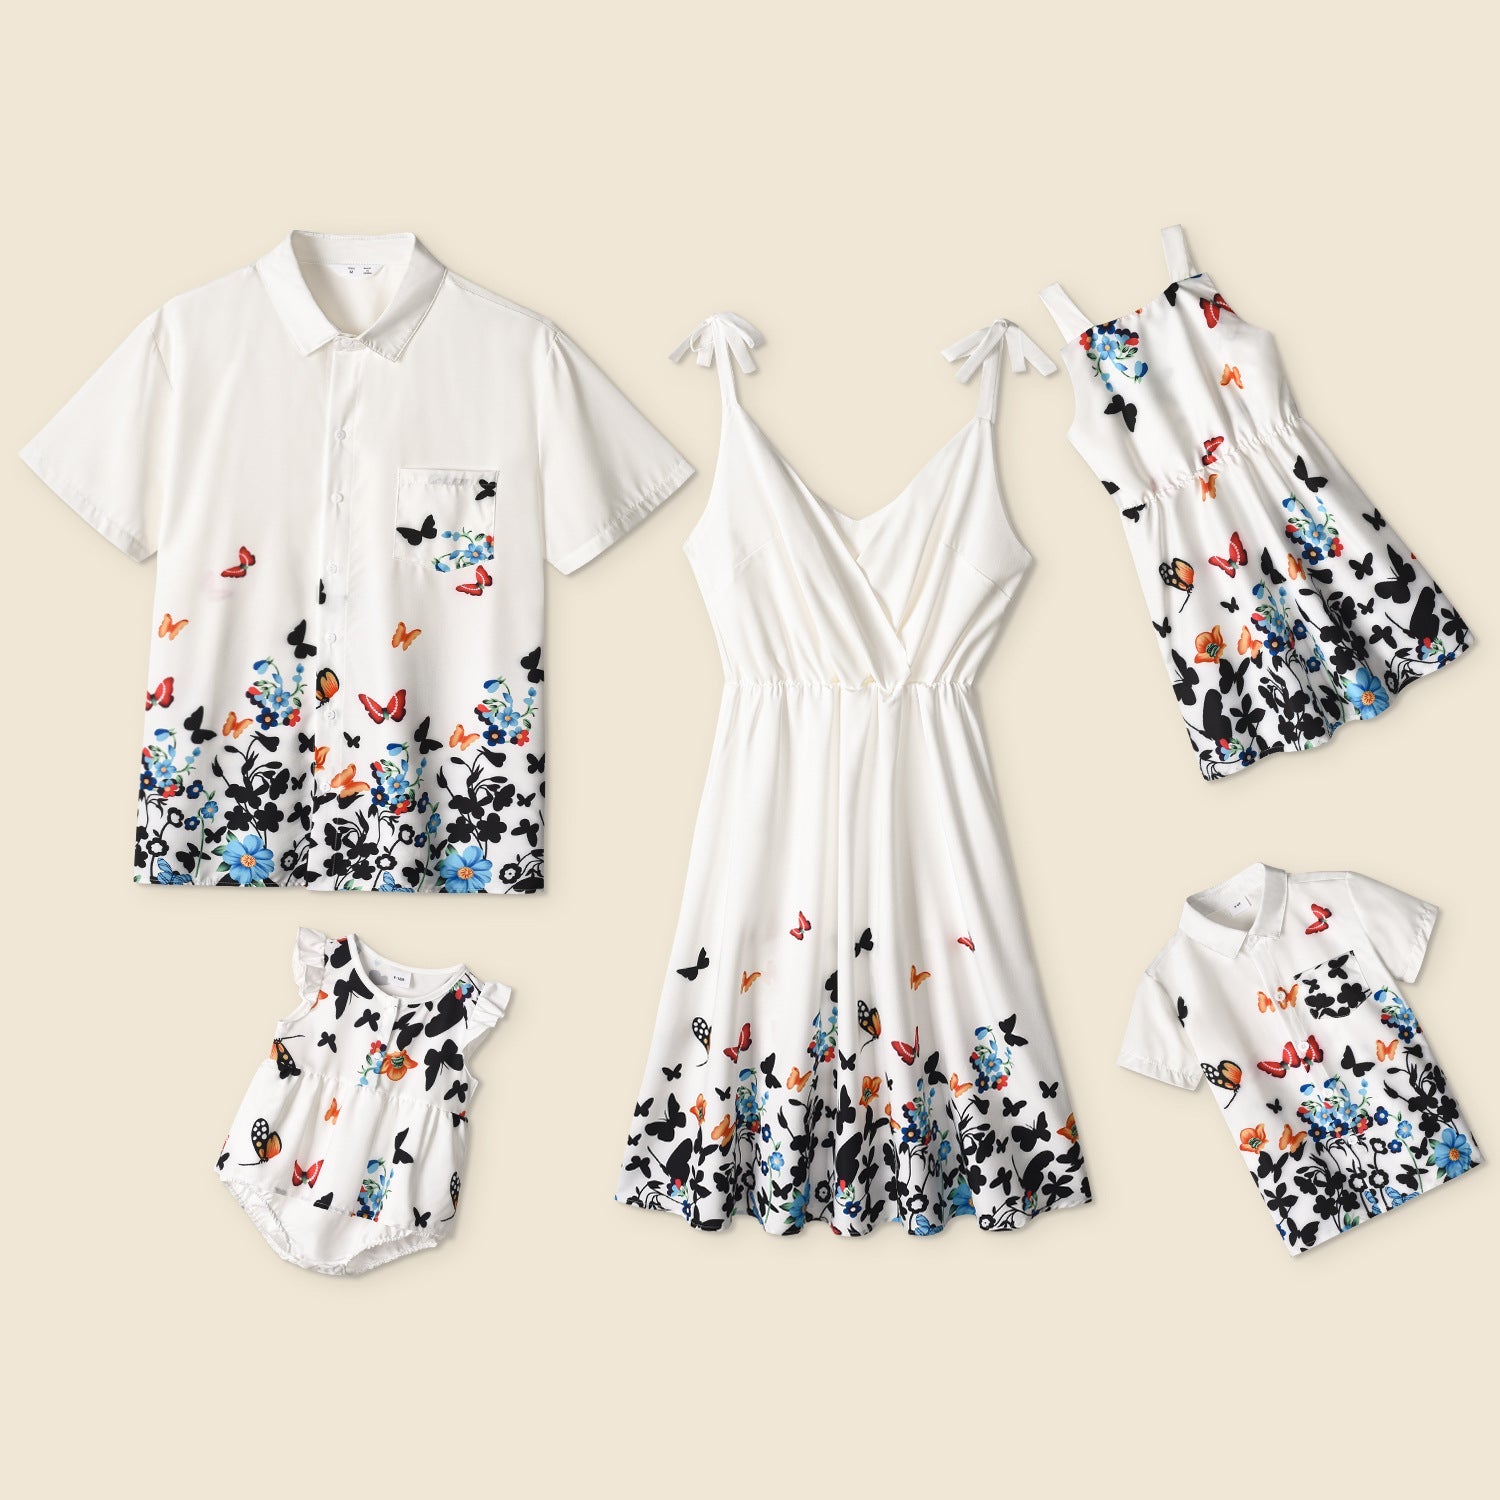 Butterfly Print Dresses & Tshirts Family Matching Sets